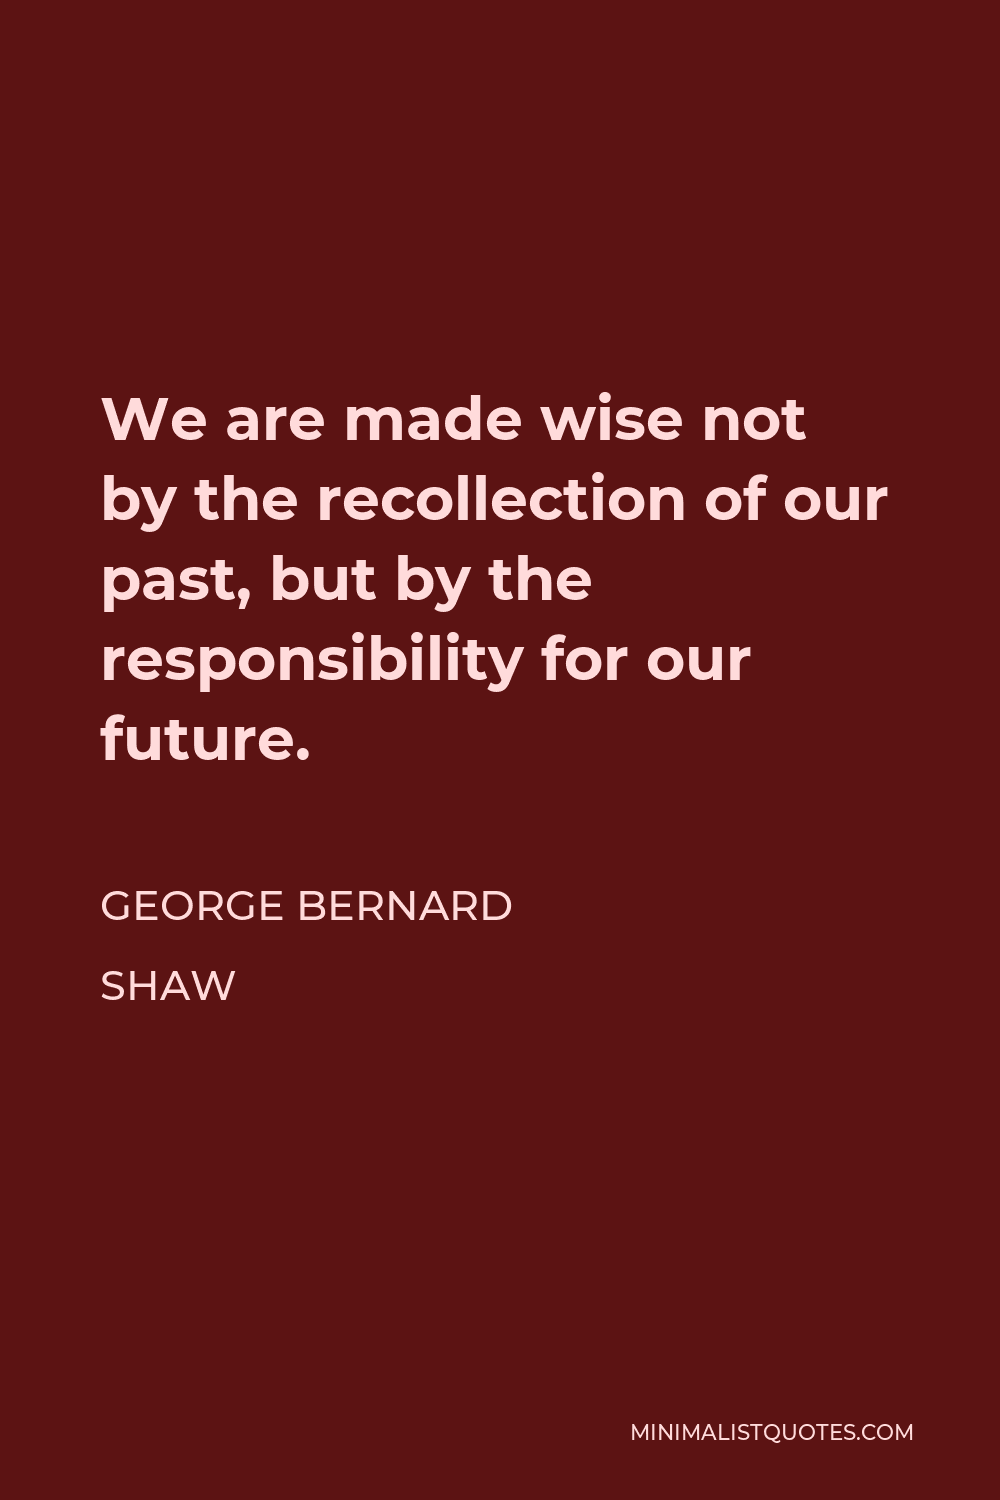 George Bernard Shaw Quote - We are made wise not by the recollection of our past, but by the responsibility for our future.